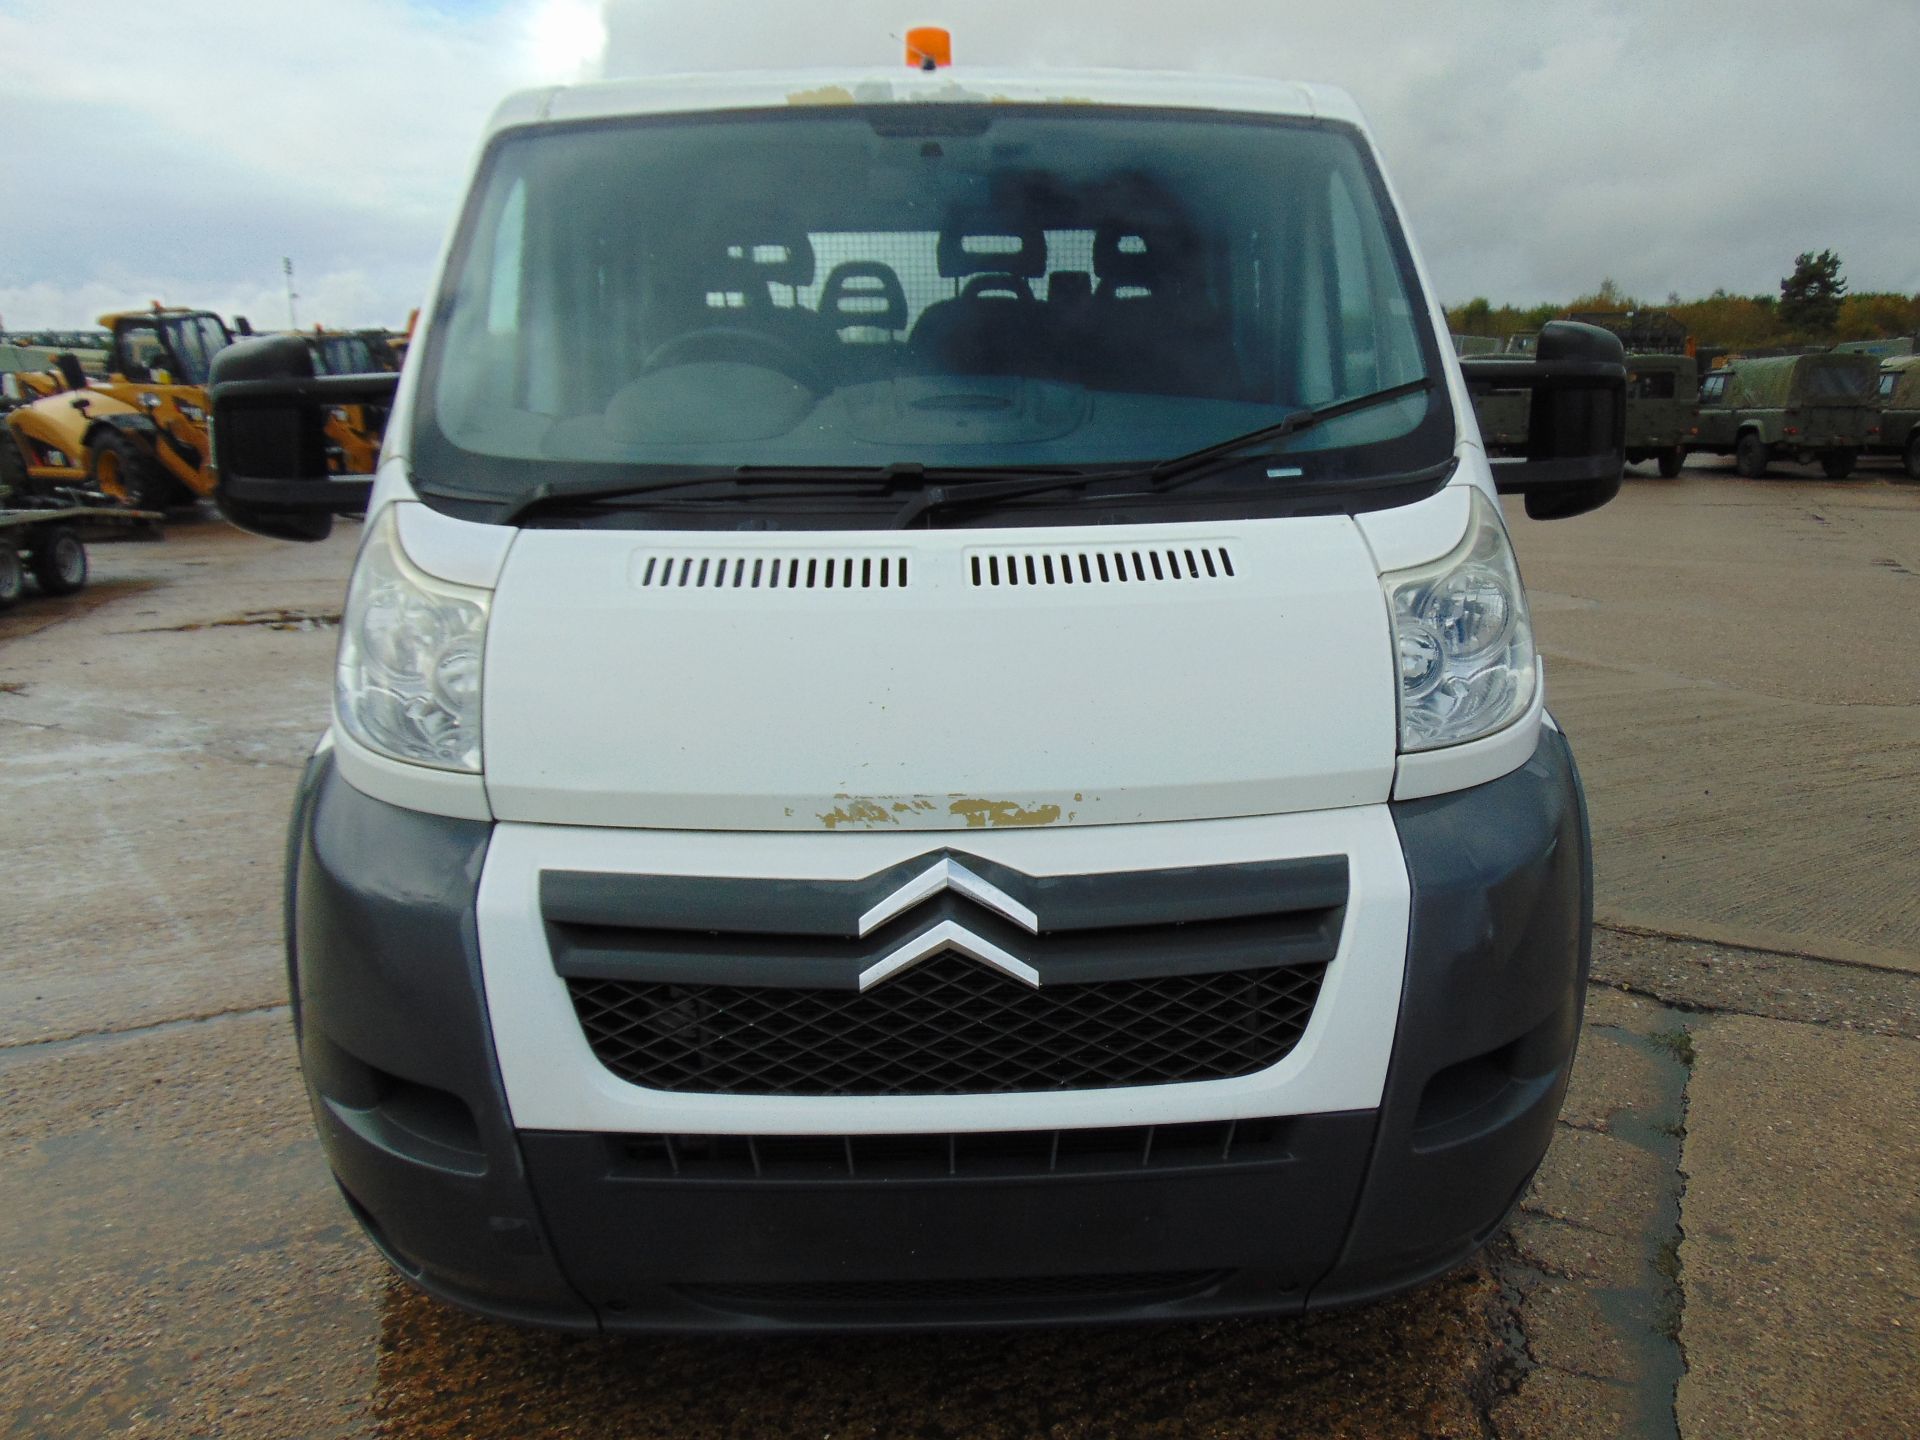 Citroen Relay 7 Seater Double Cab Dropside Pickup - Image 2 of 17